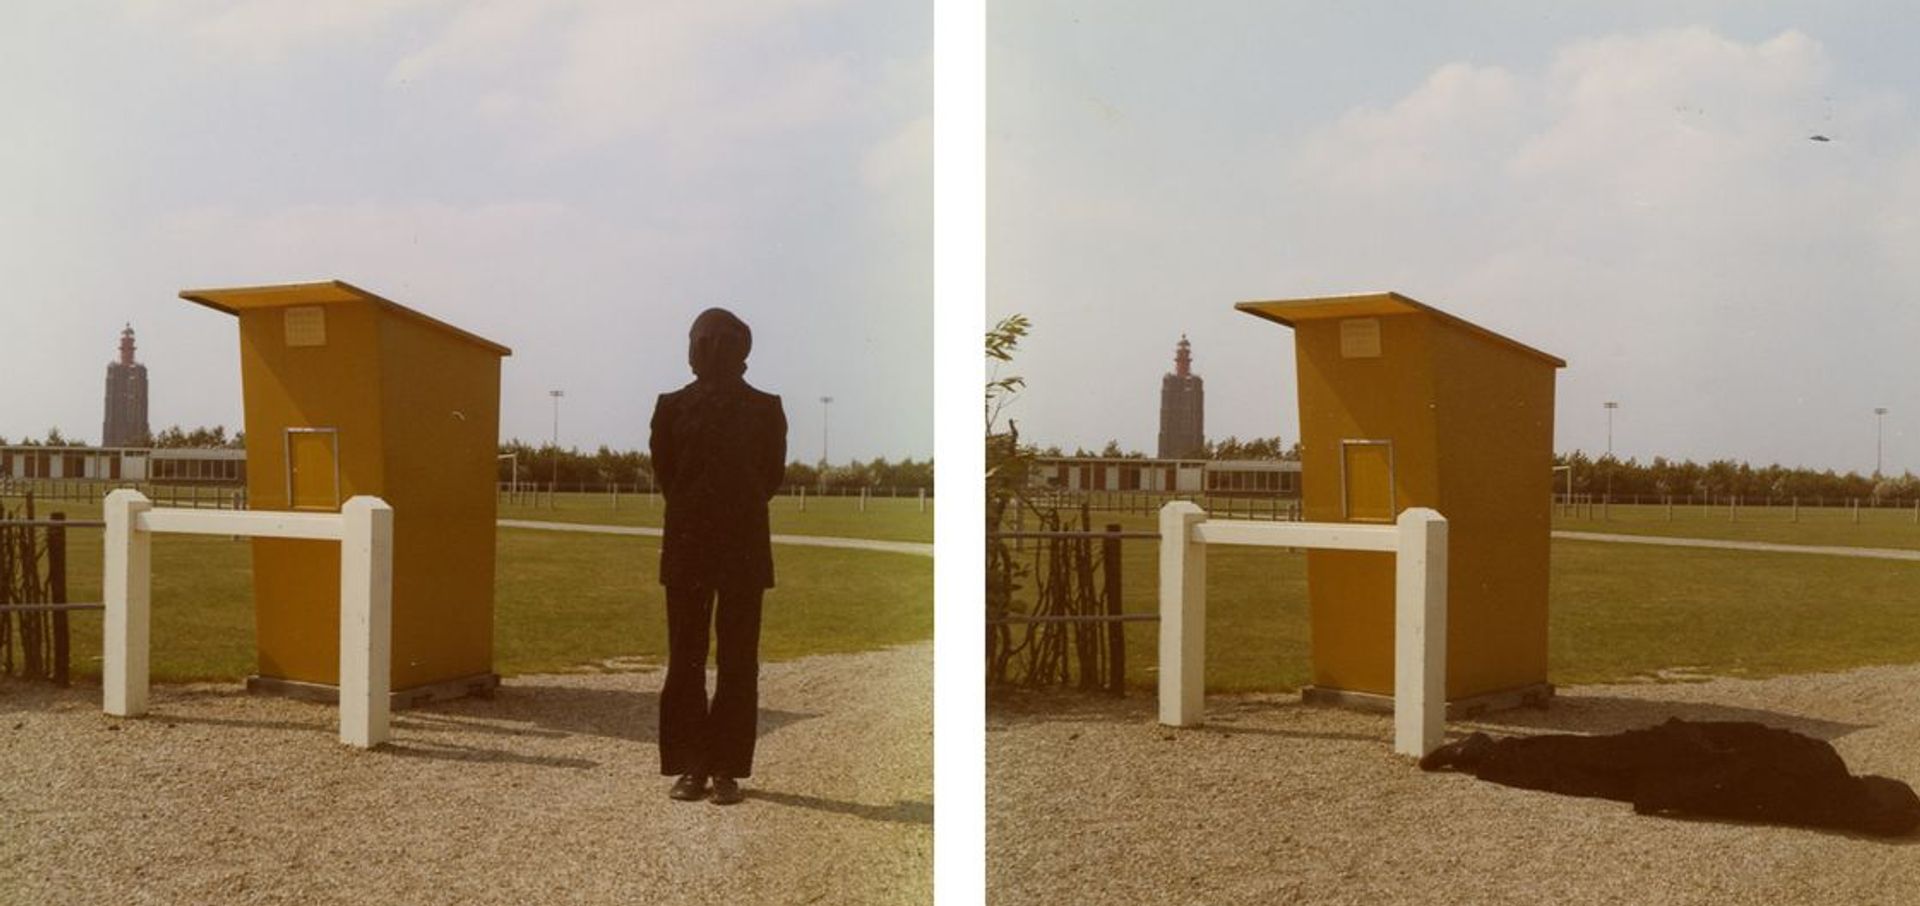 Bas Jan Ader, Studies for Westkapelle, Holland (1971) © The Estate of Bas Jan Ader / Mary Sue Ader Andersen, 2016 / The Artist Rights Society (ARS), New York. Courtesy of Metro Pictures, New York and Meliksetian | Briggs, Los Angeles